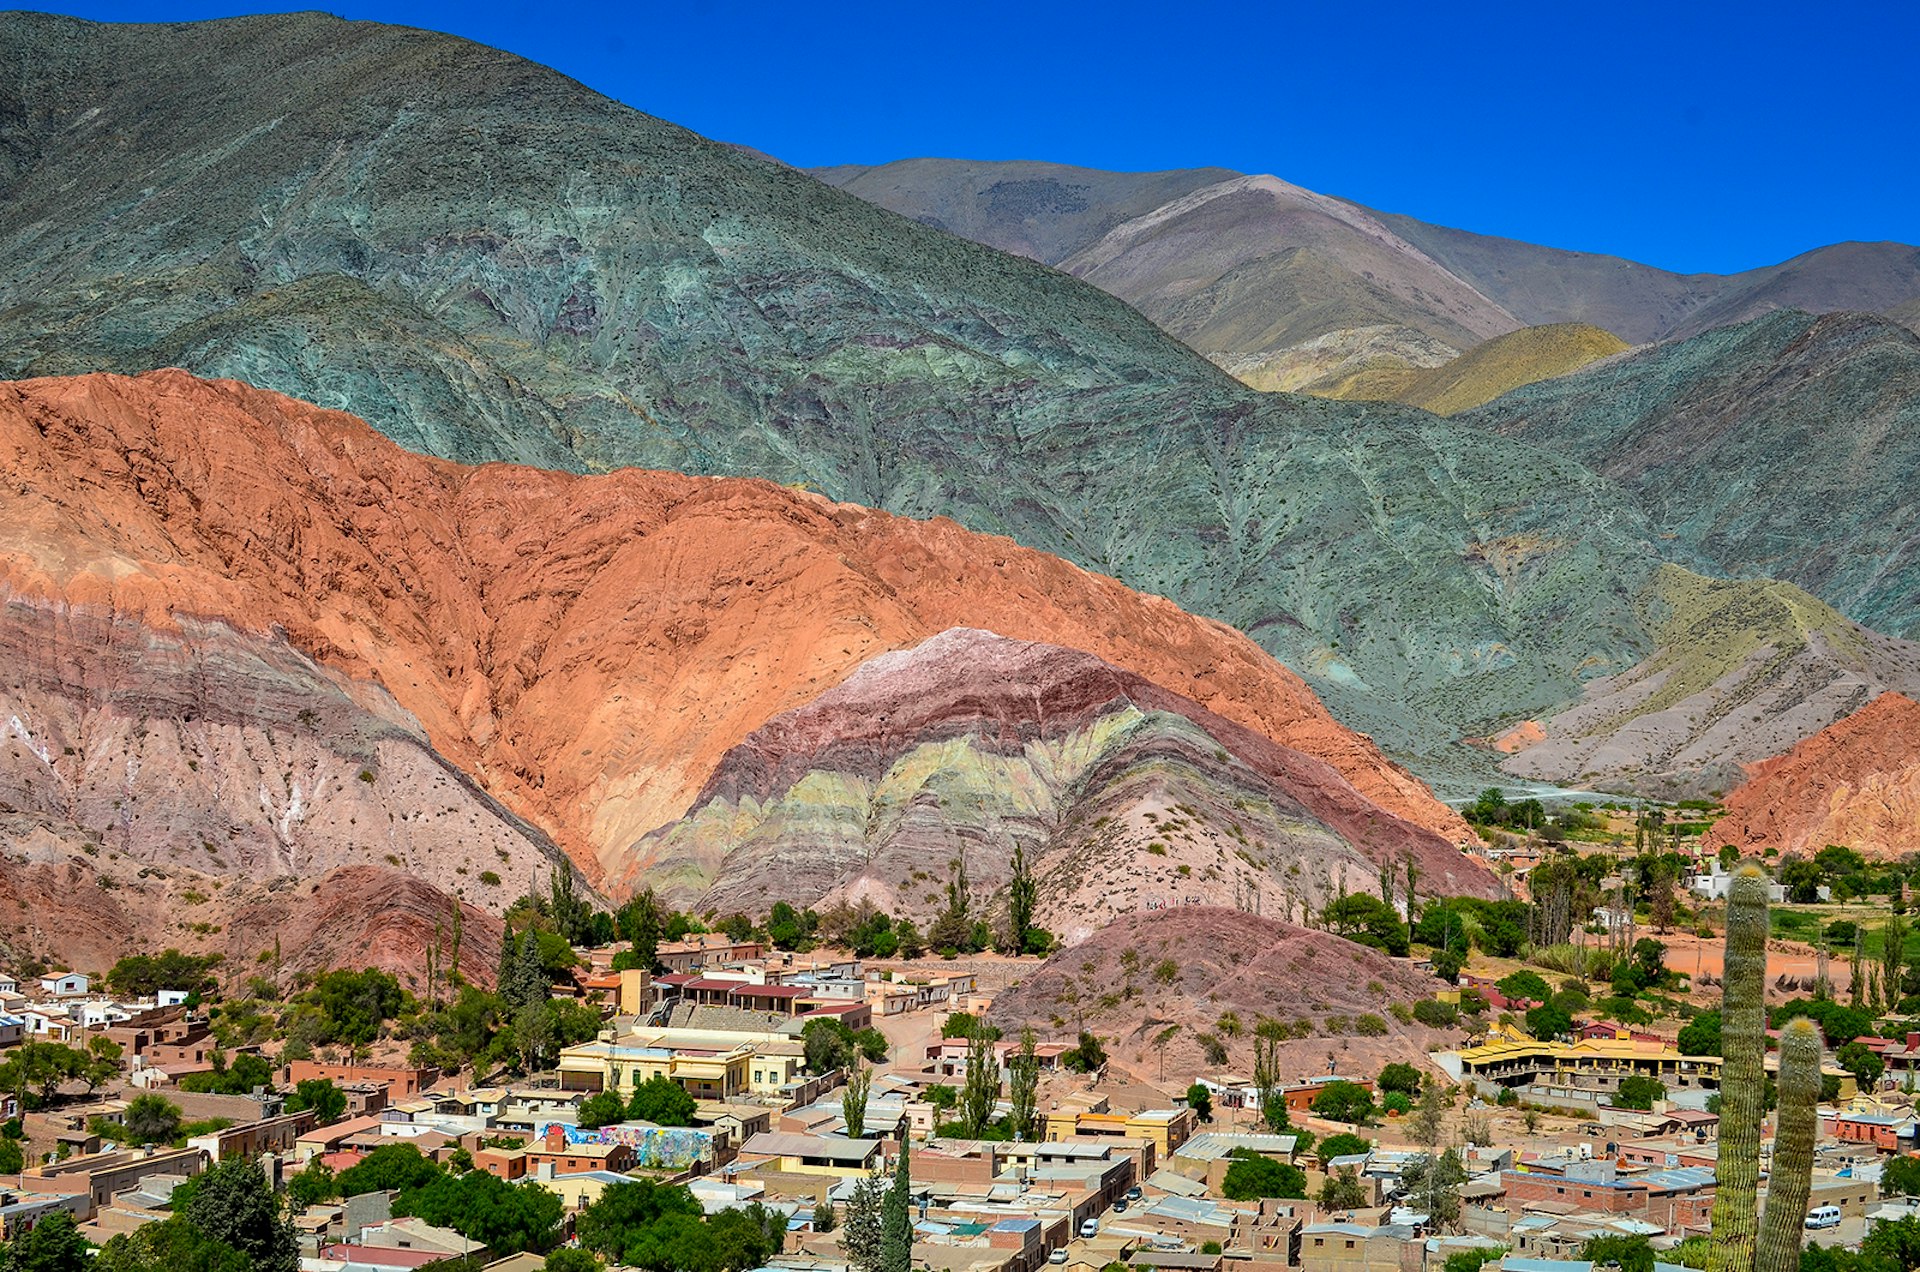 An aerial view of a town nestled into a series of brightly colored hills in Argentina © Marcos Radicella / Getty Images